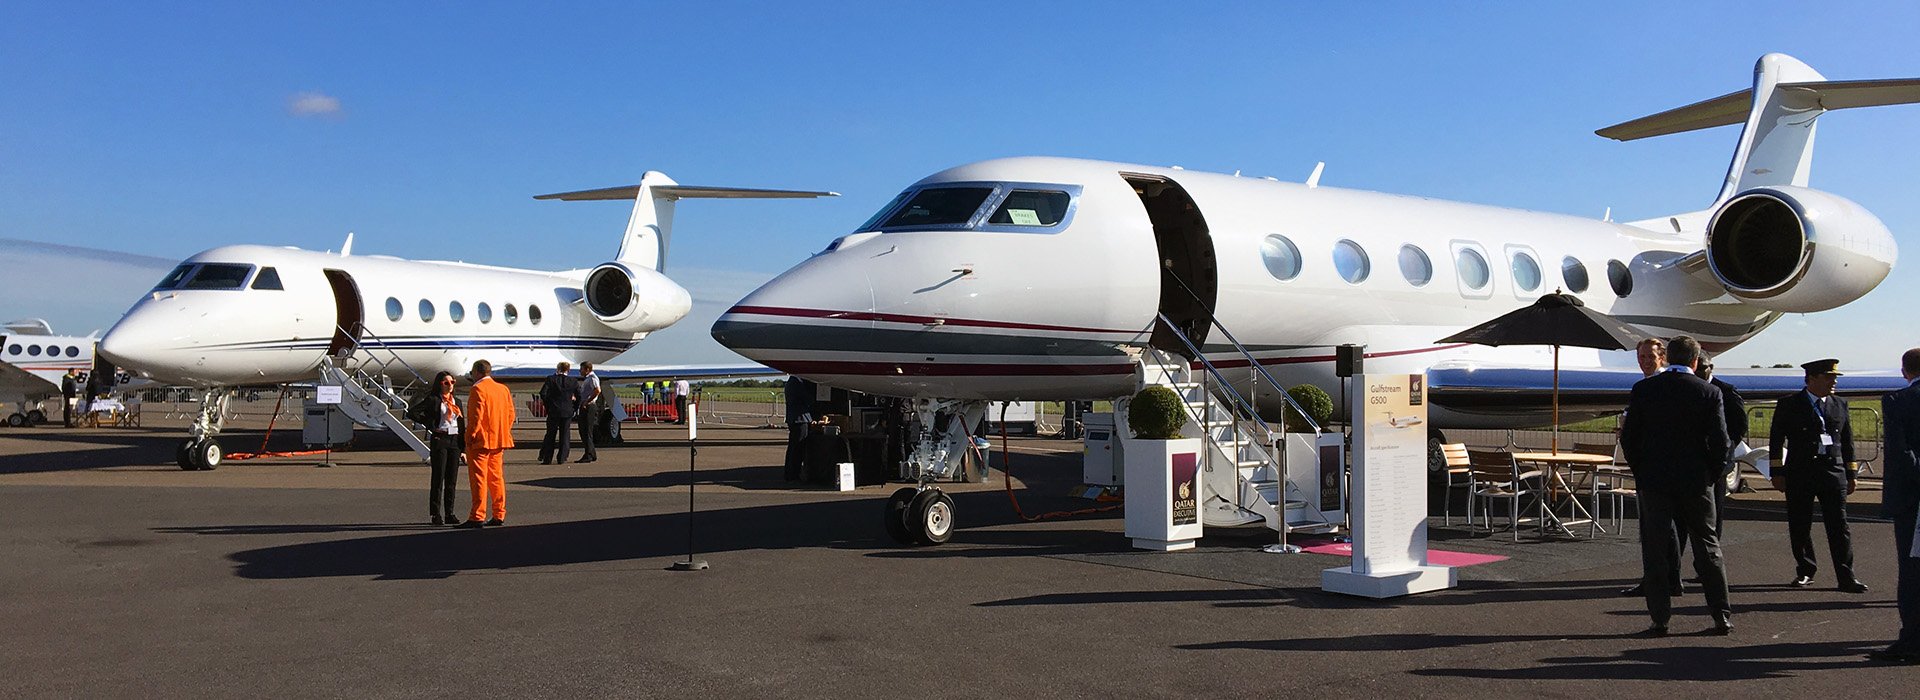 Euro Jet exhibited at Air Charter Expo 2019